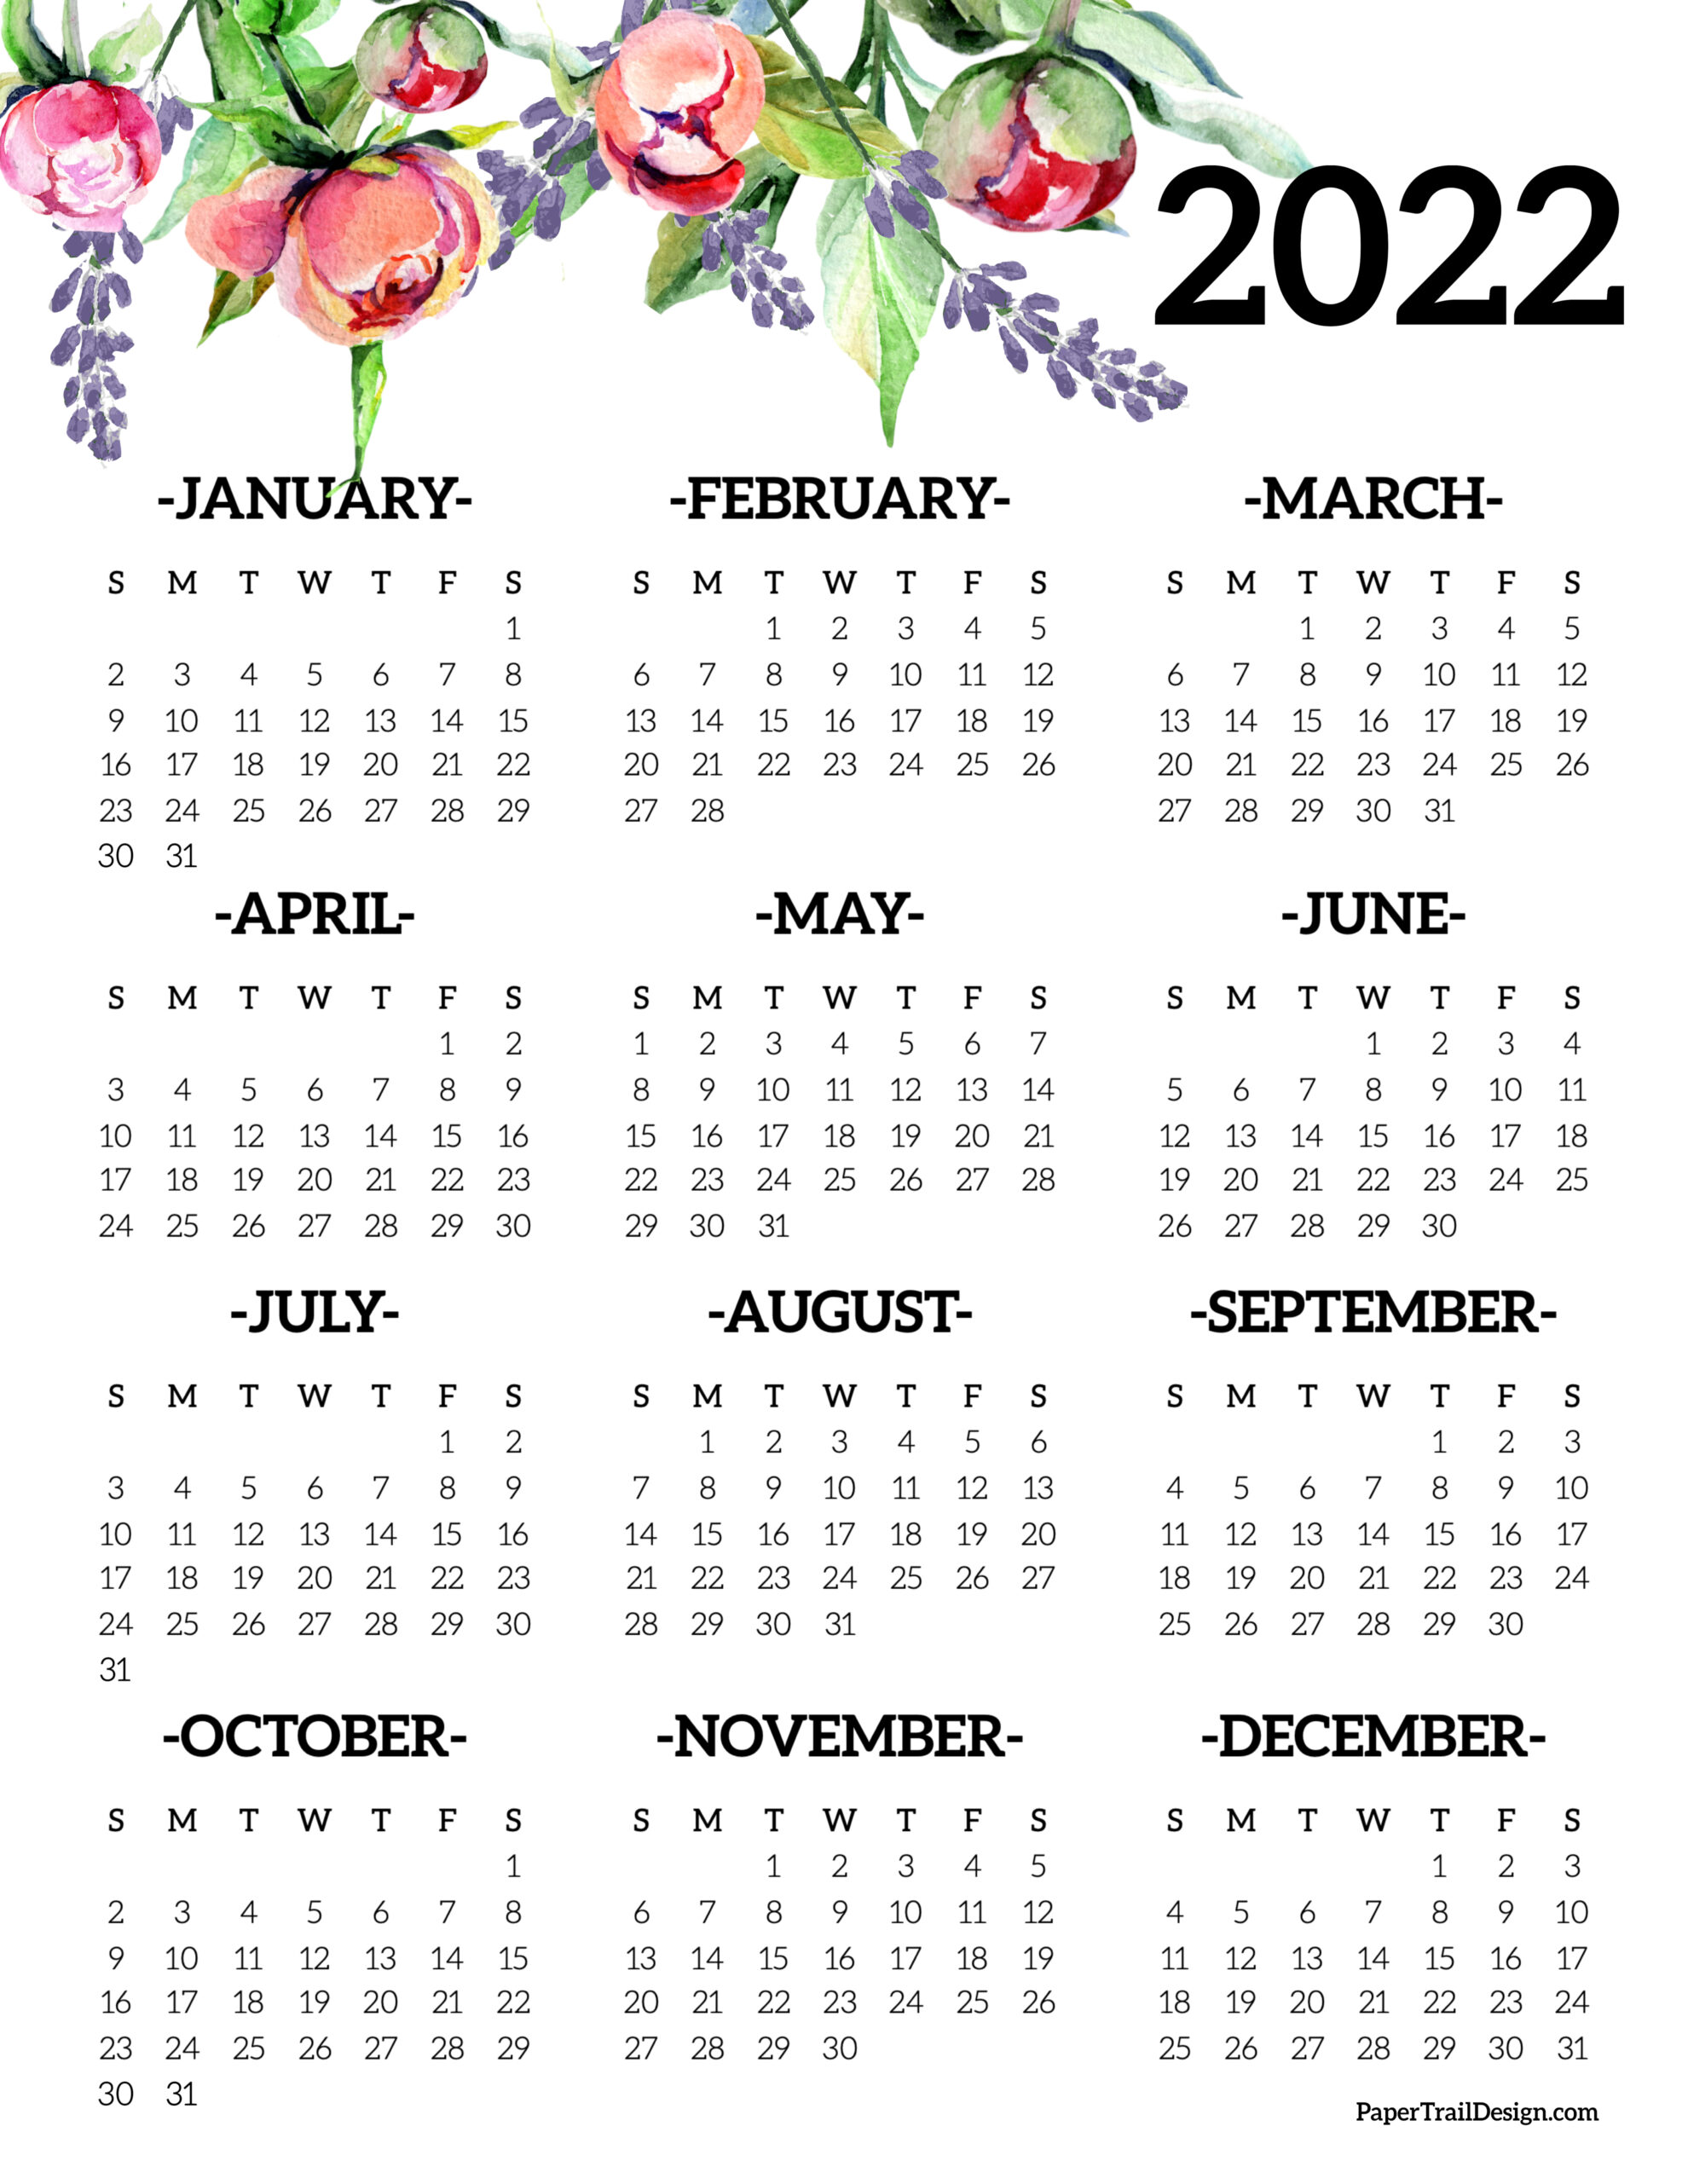 Month At A Glance Calendar 2022 Calendar 2022 Printable One Page - Paper Trail Design